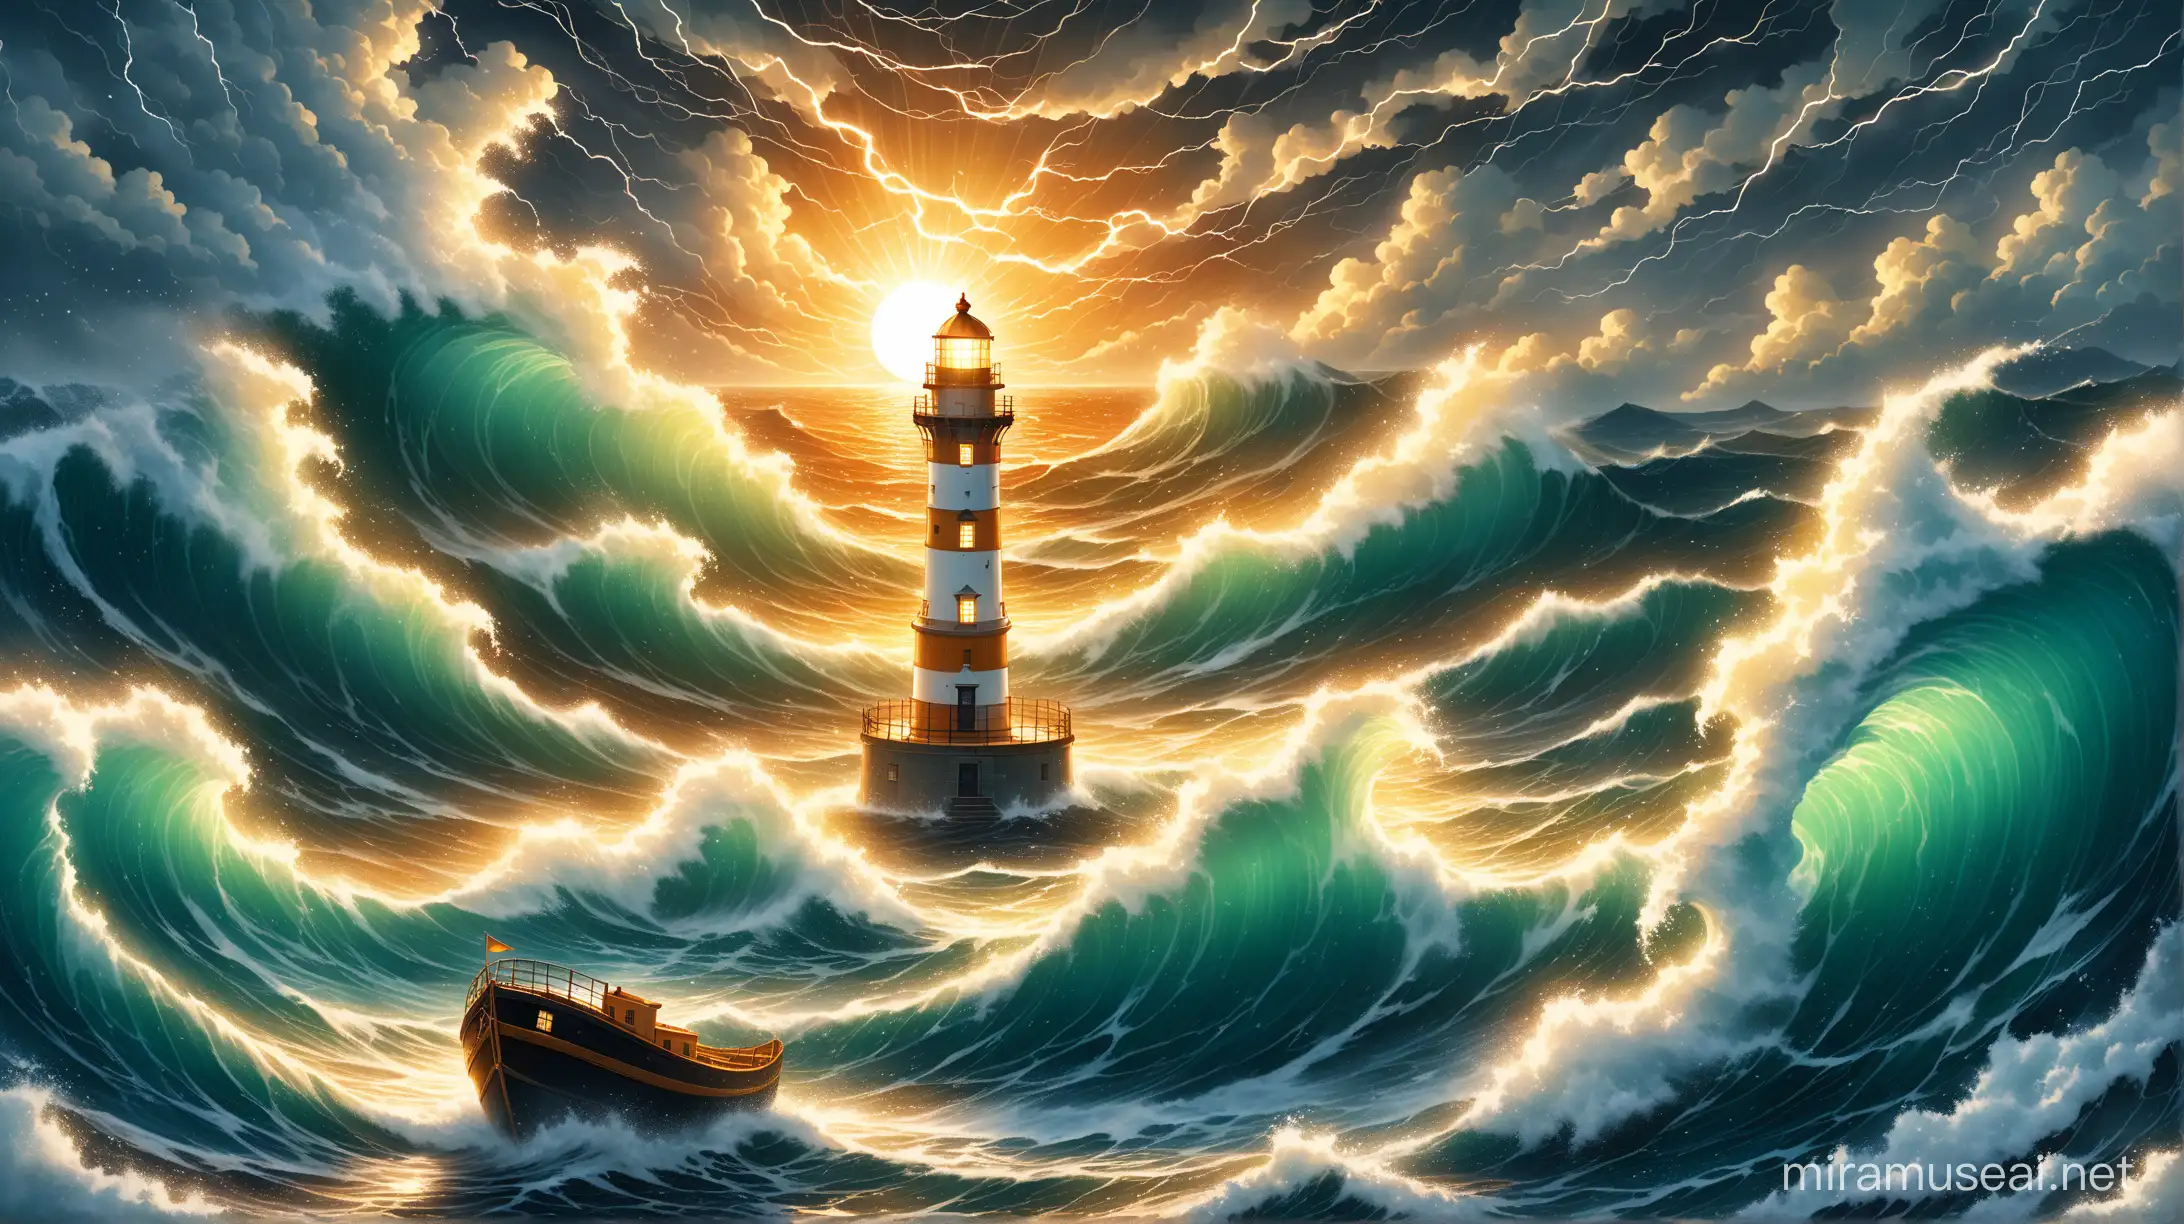 Highly detailed illustration of the beautiful lighthouse in an extraordinary and surreal scene in a chaotic seascape, high waves of vast waves colliding with realistic wildness in the background, a boat is being tossed around, lightning and swirls of wind in a sky that enhances the drama of the storm, shining sun turns the clouds yellow and orange